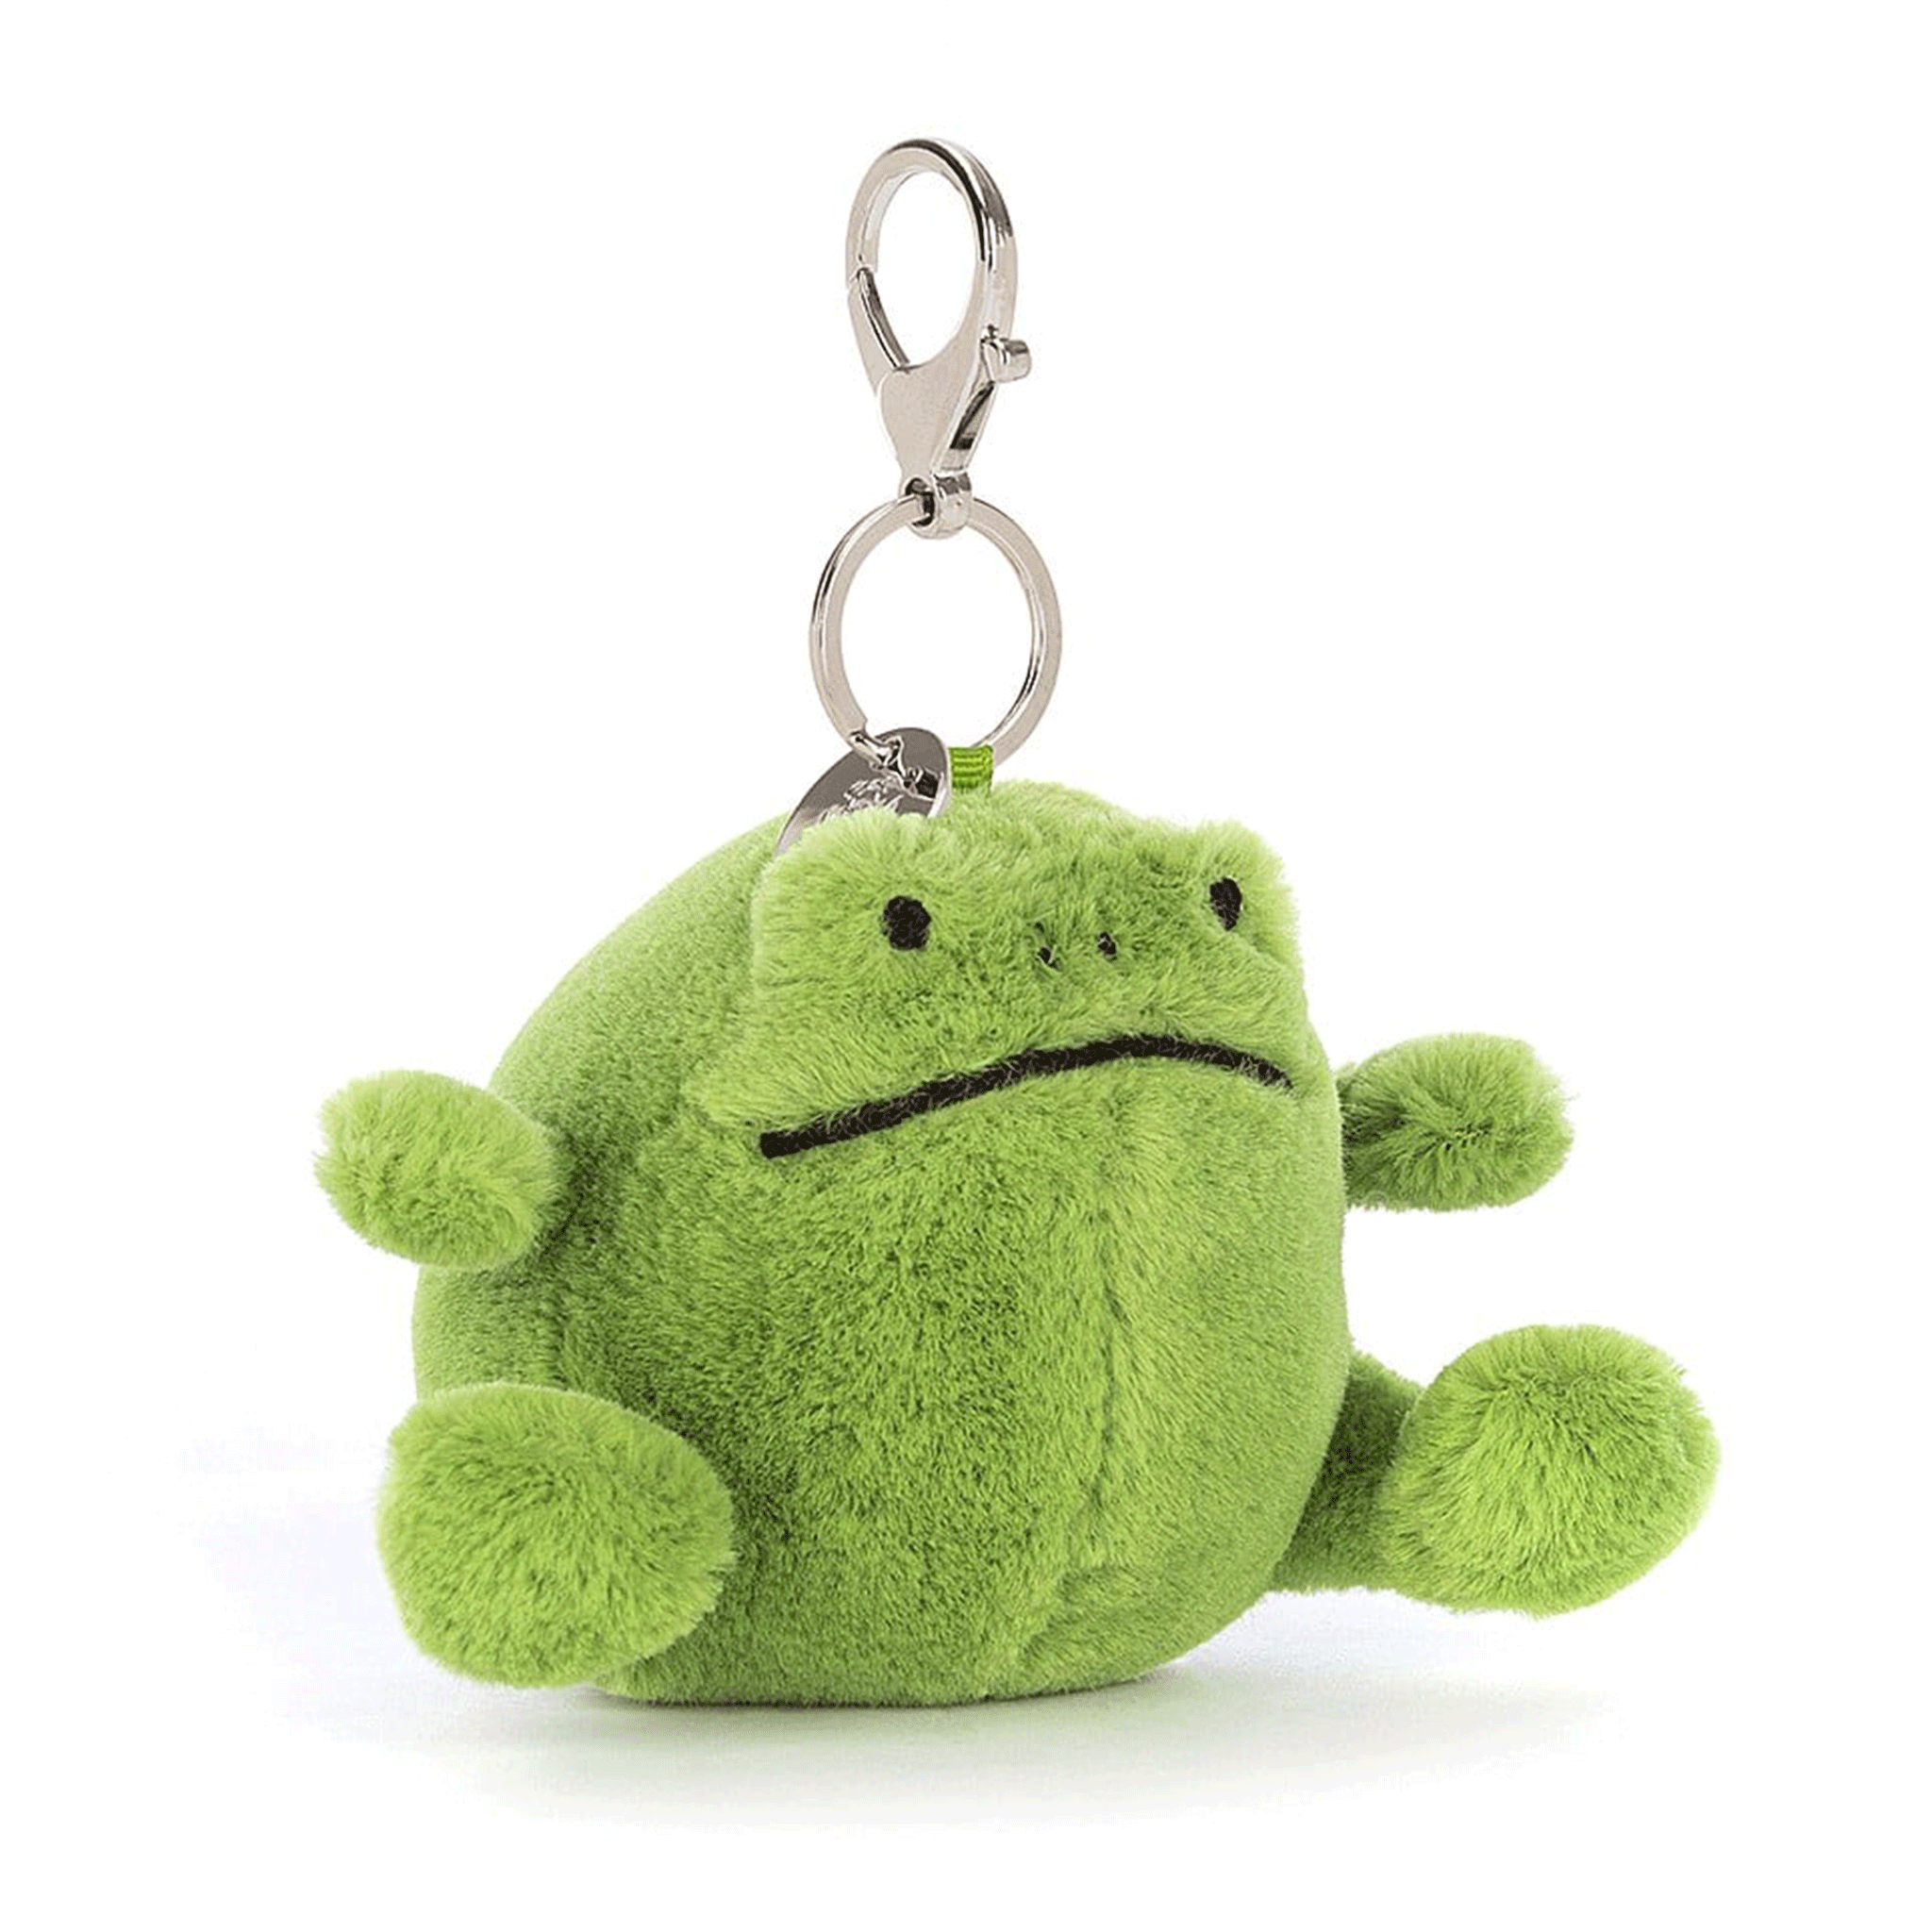 On a white background is a small green stuffed toy frog shaped bag charm. 